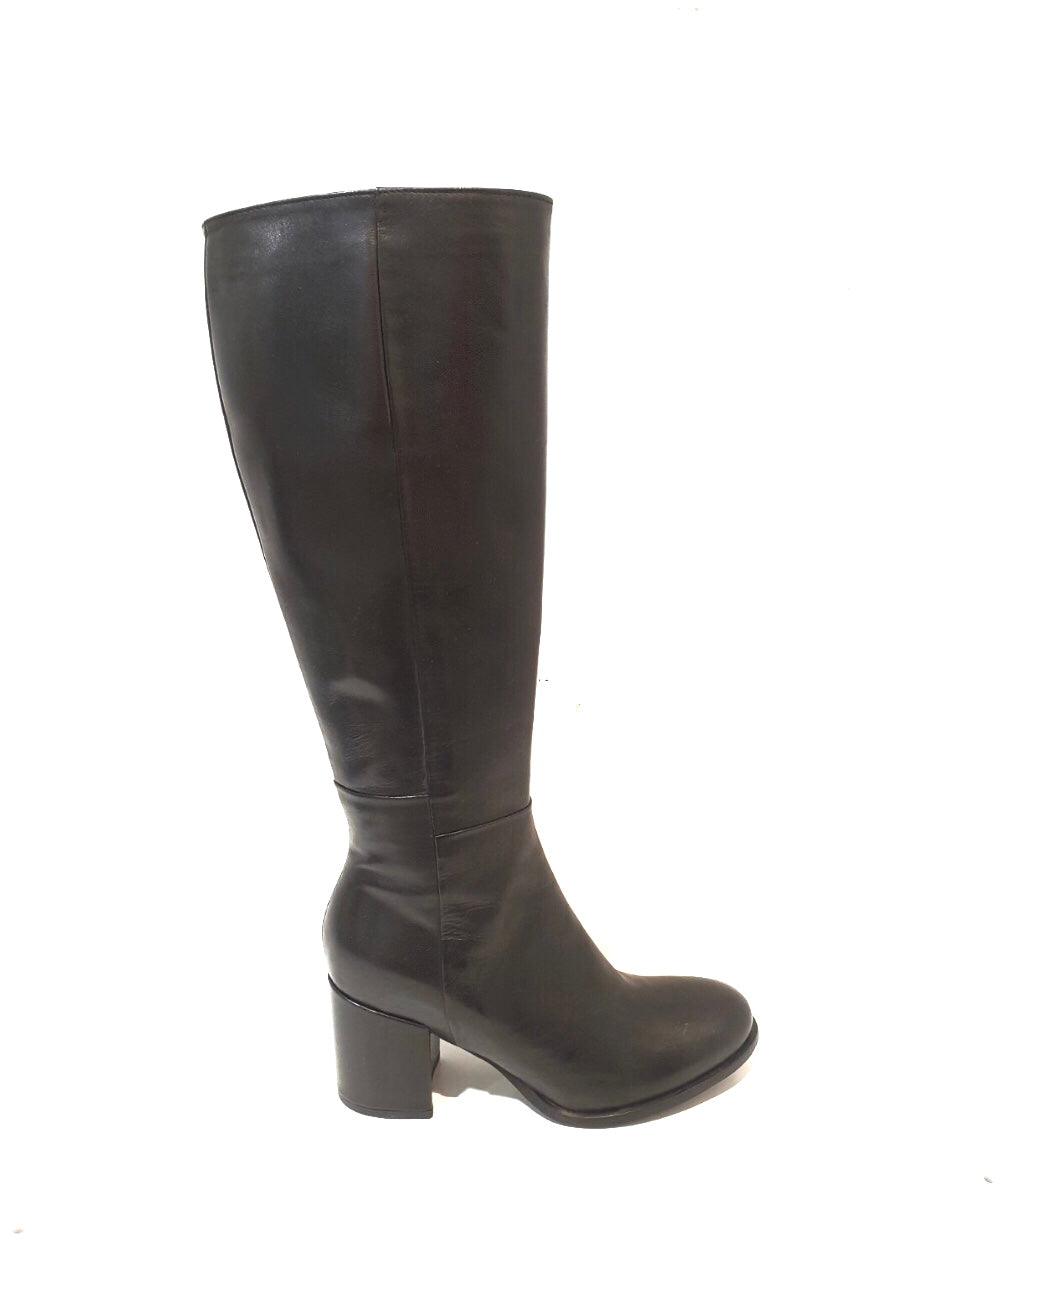 Progetto T250 Black Nero Nappa Knee High Zip Boot Made In Italy